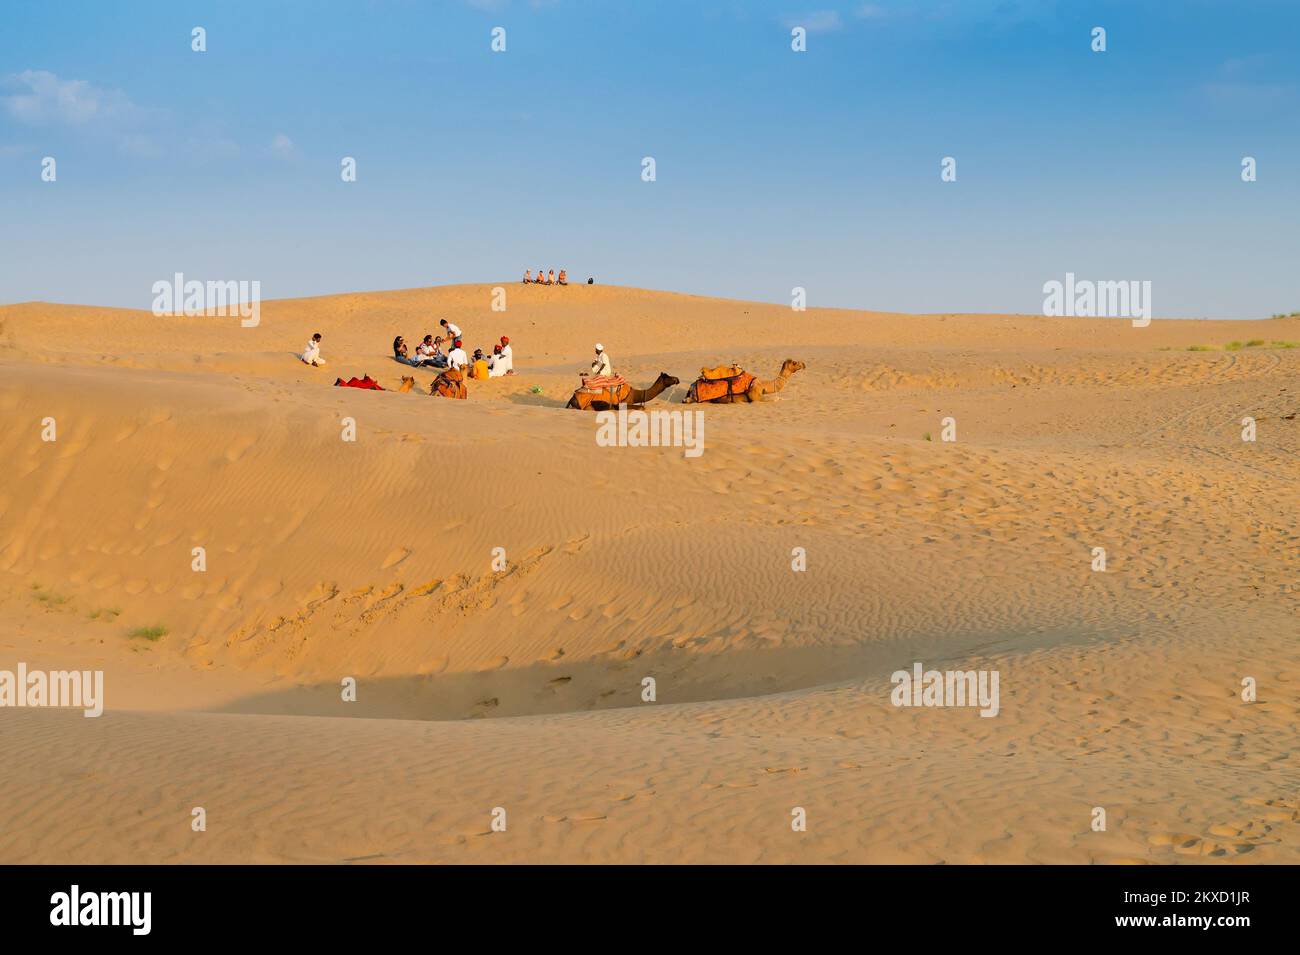 Tourists with camels, Camelus dromedarius, at sand dunes of Thar desert, Rajasthan, India. Camel riding is a favourite activity amongst all tourists v Stock Photo